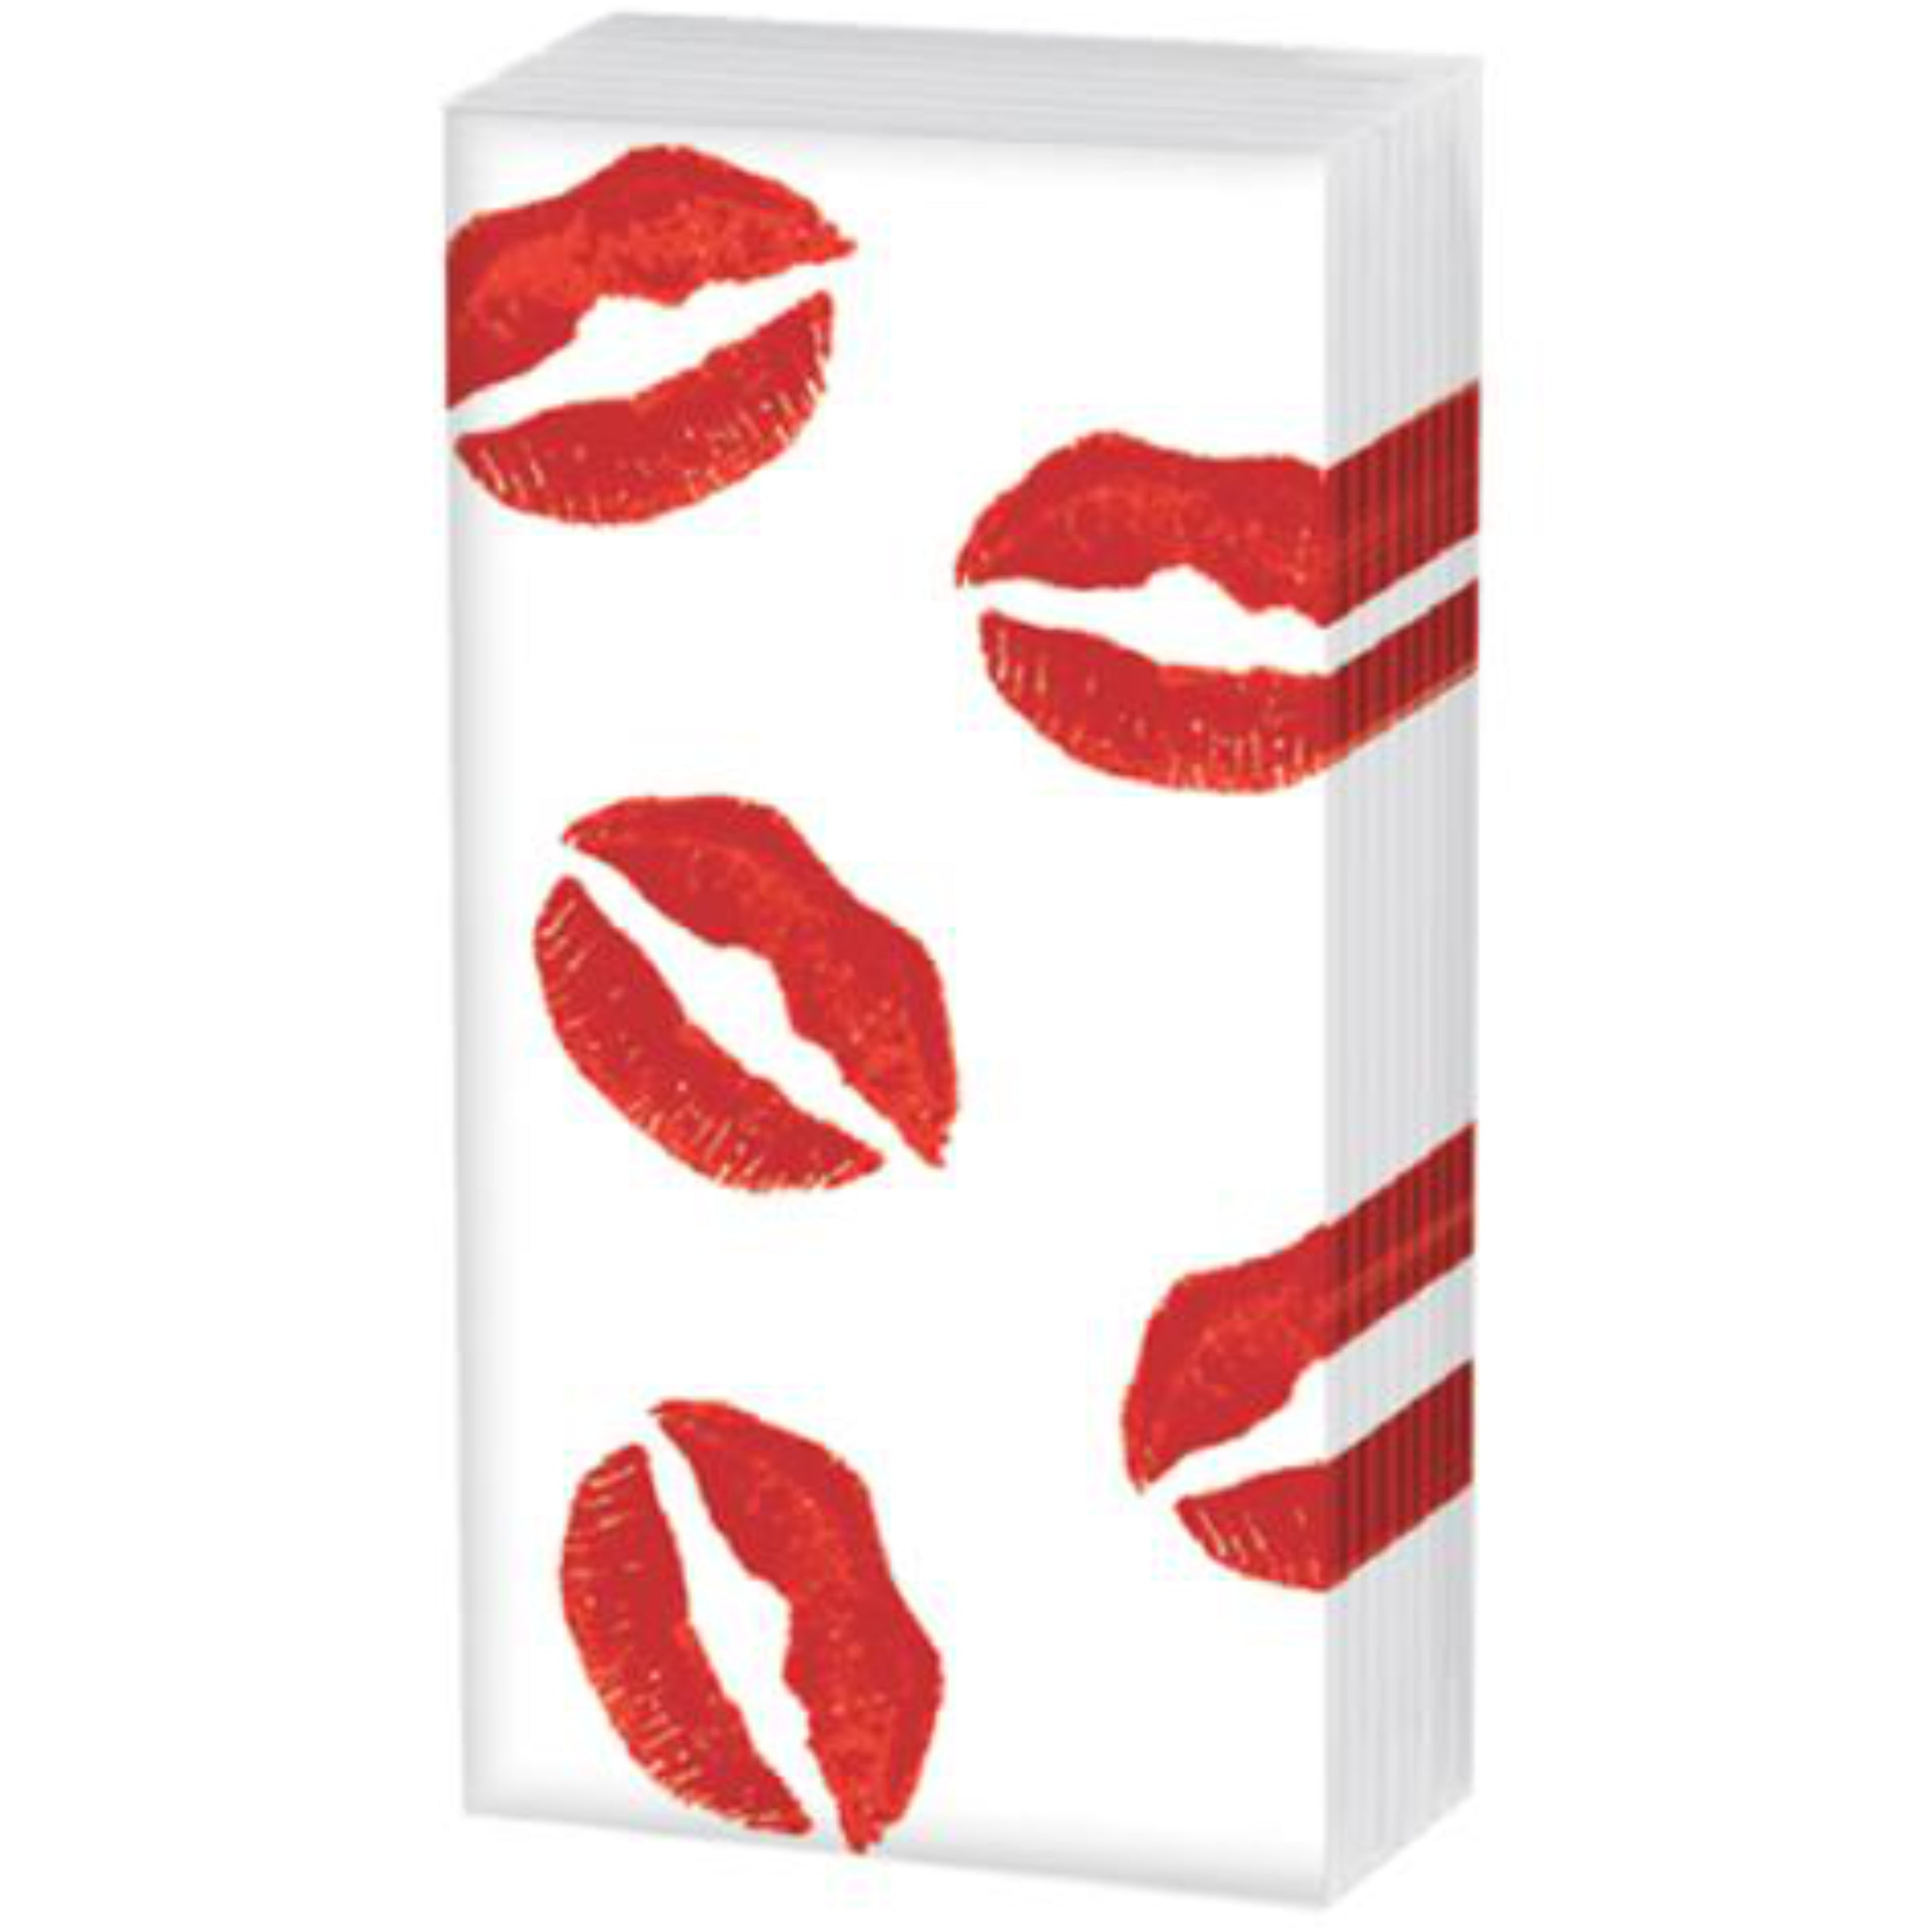 Lips Red Sniff Pocket Tissues – 10 Tissues Per Pack